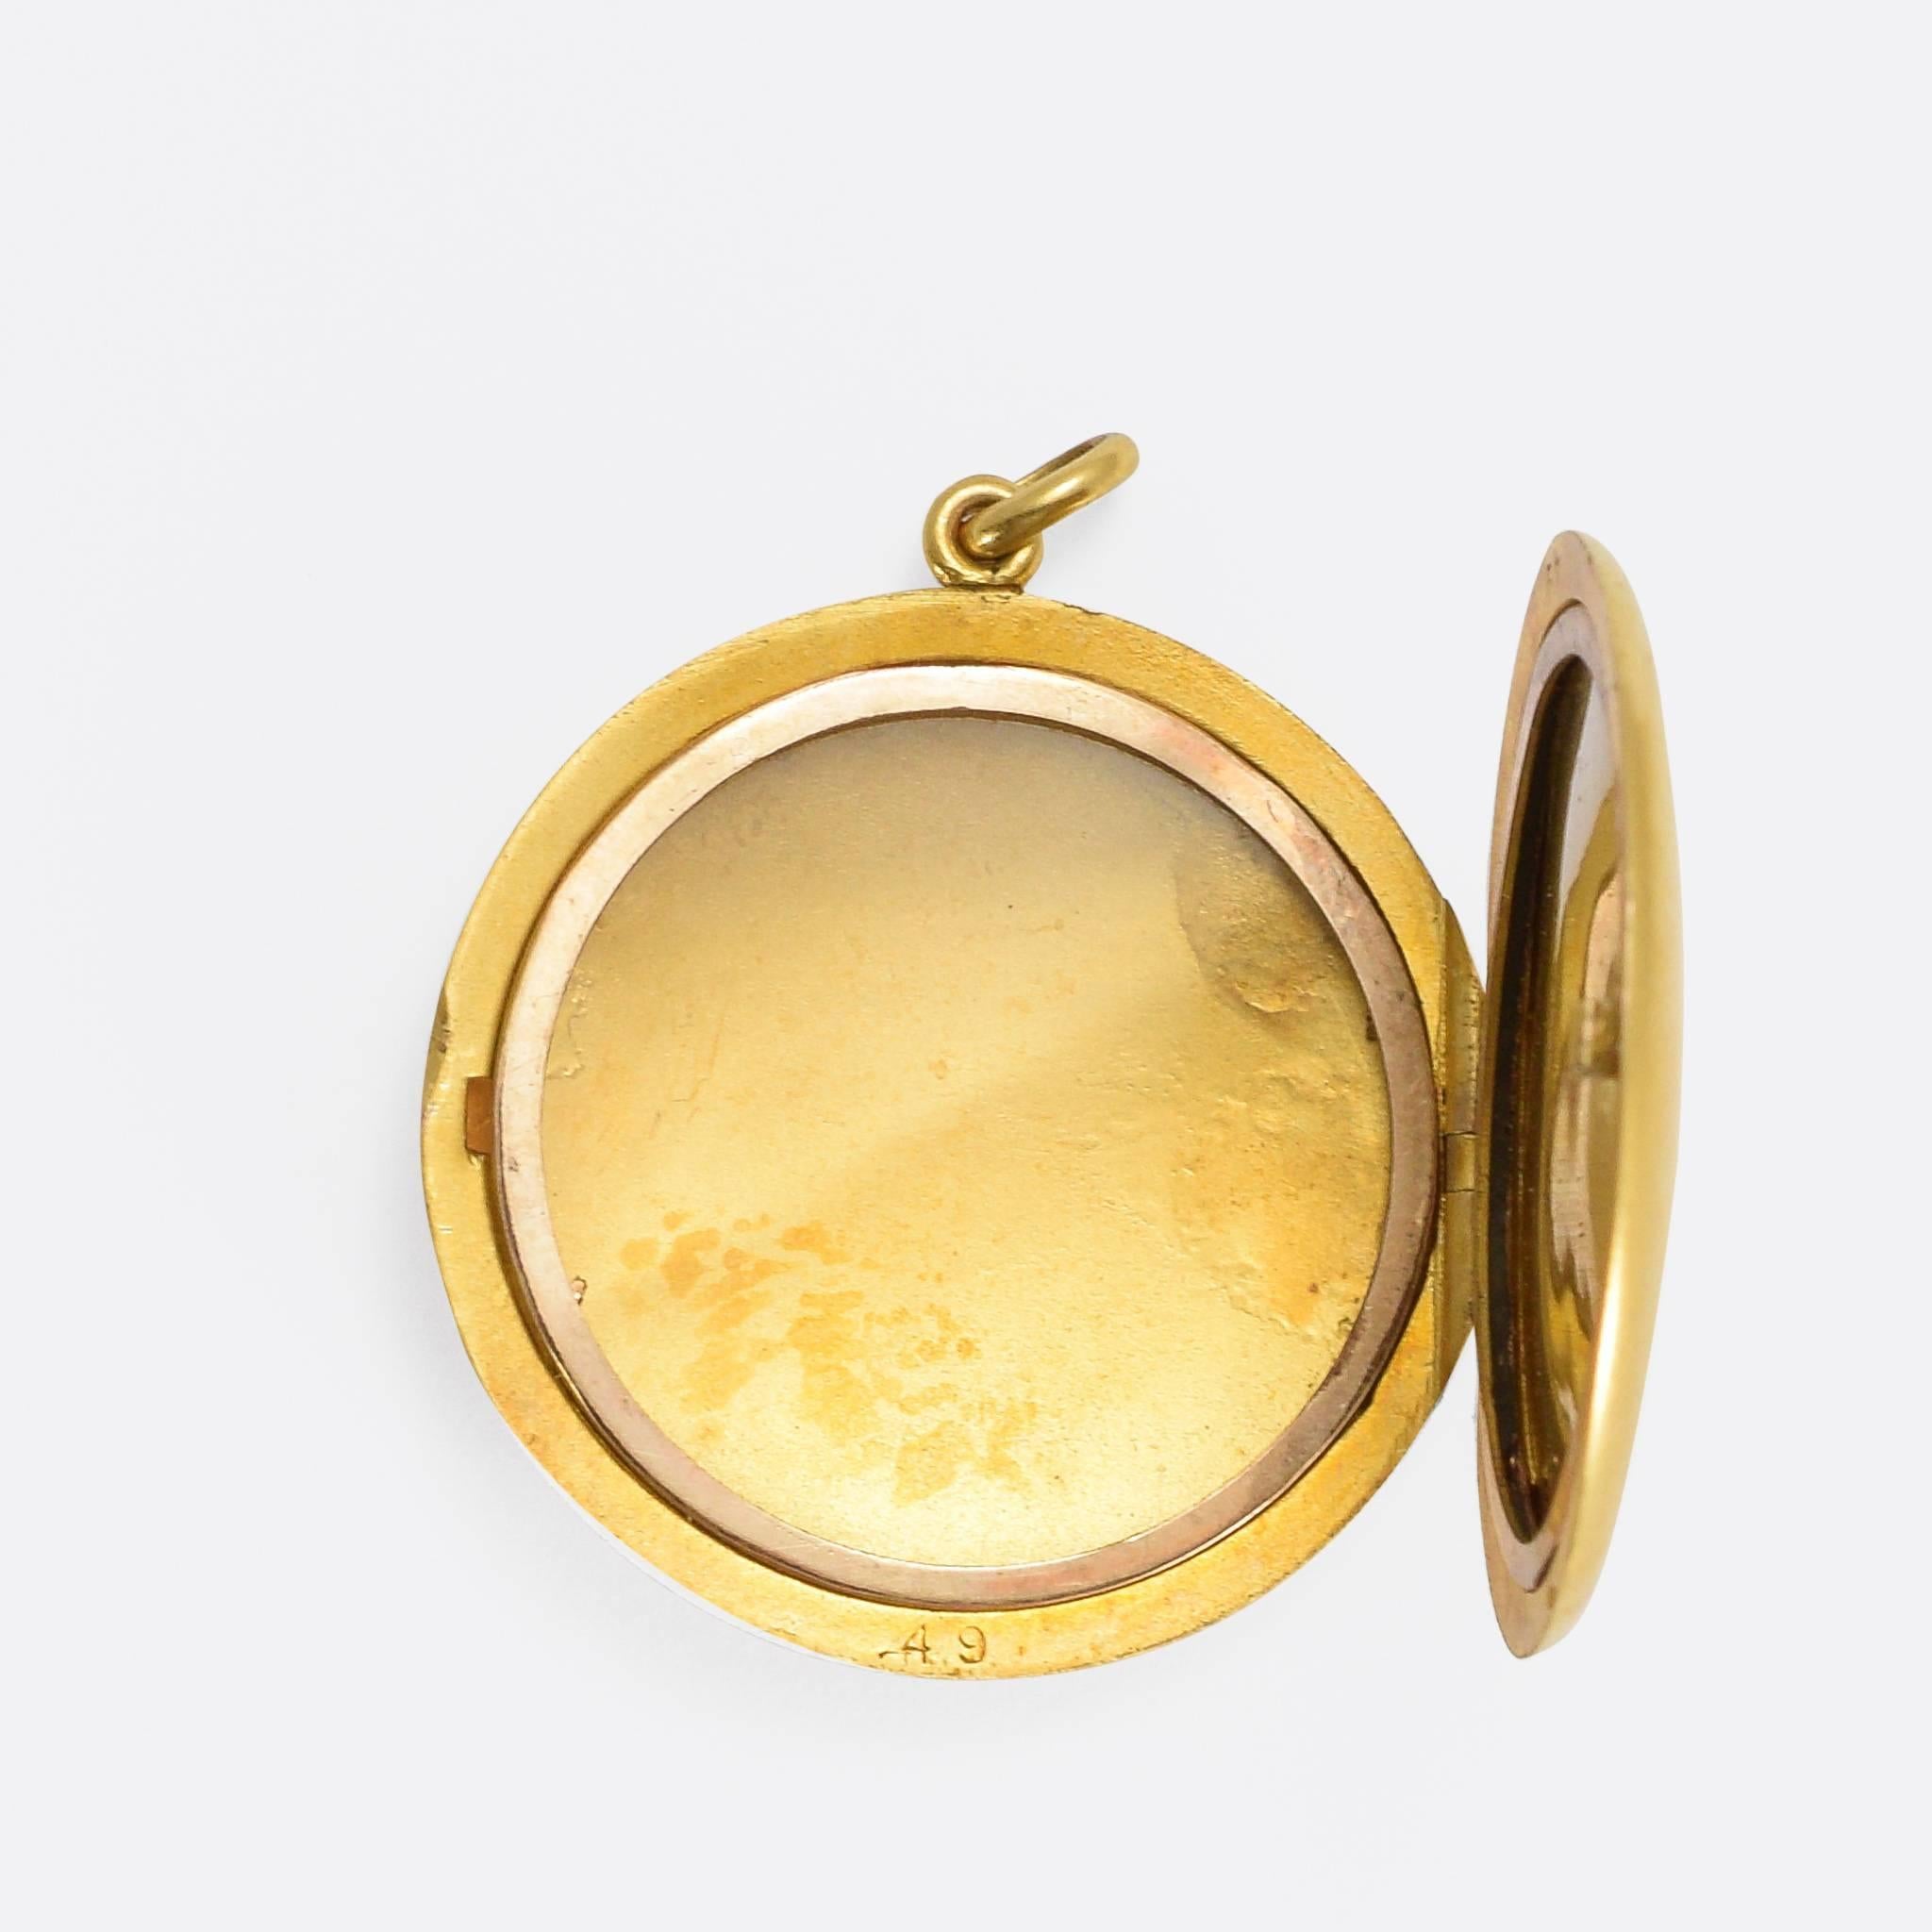 This beautiful round locket is set with a single old English brilliant cut diamond, inside a pretty star motif. It's modelled in rich 15k gold, lightly brushed to give a gorgeous matte effect, and dates to c.1880.